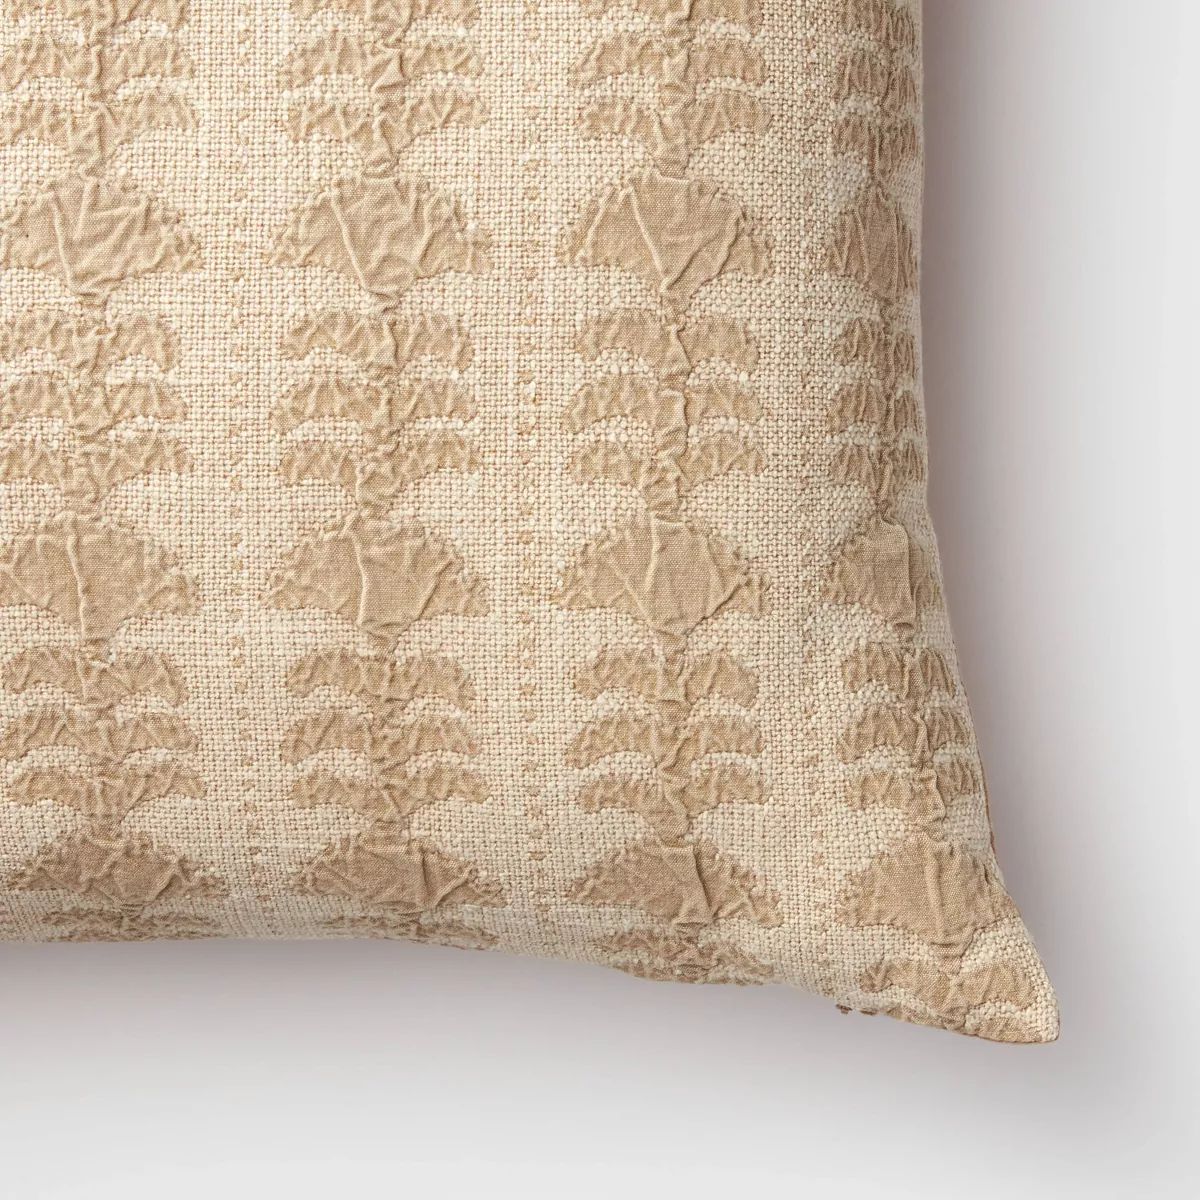 Woven Block Print Square Throw Pillow - Threshold™ designed with Studio McGee | Target